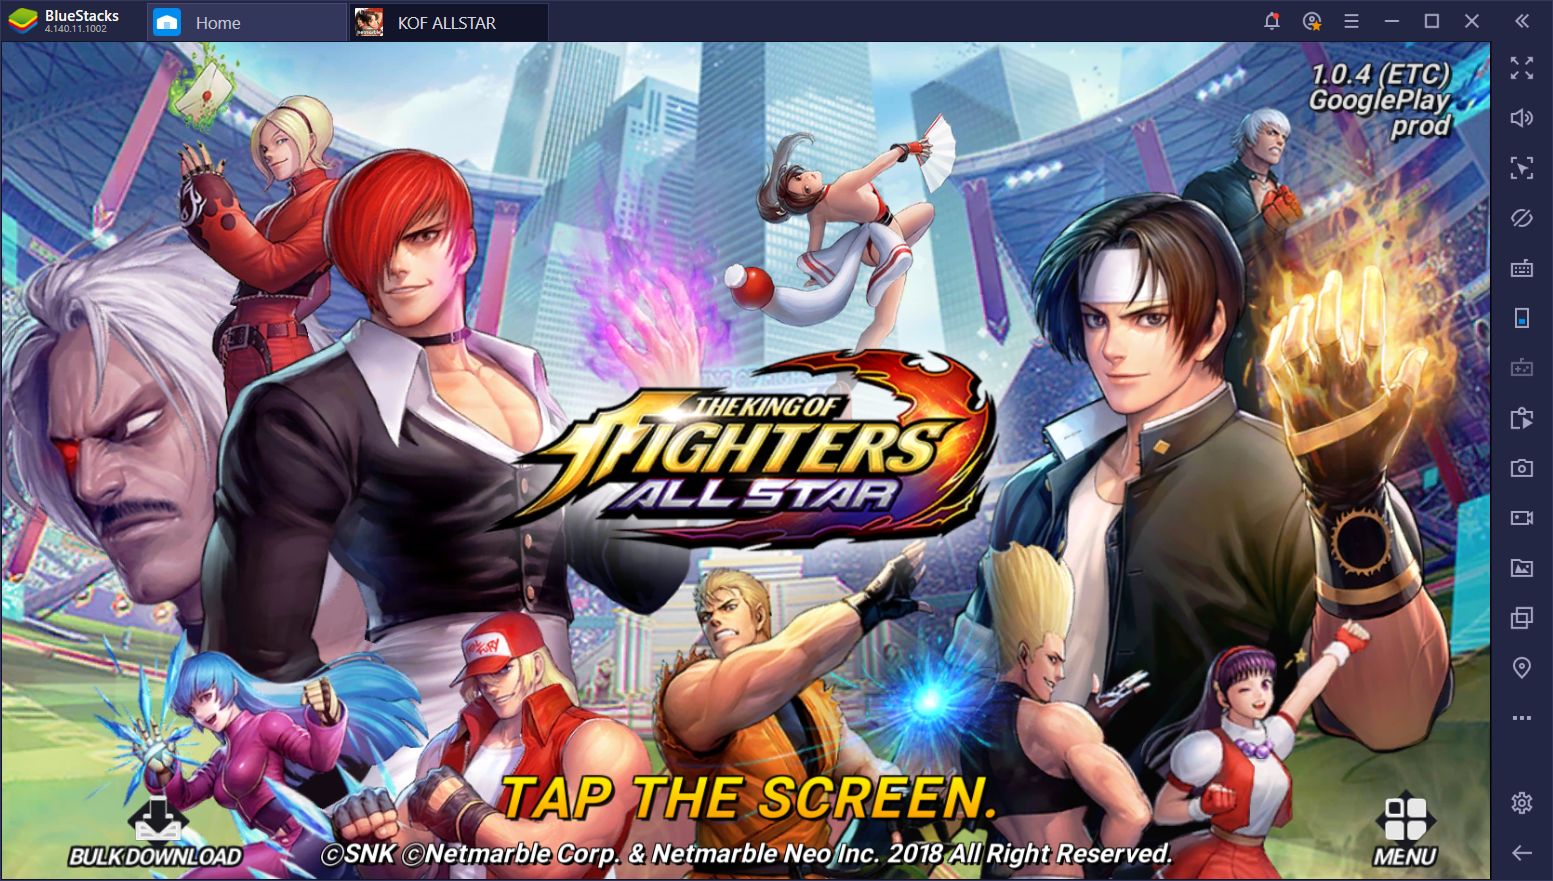 How to Play The King of Fighters ALLSTAR on Your PC Using BlueStacks